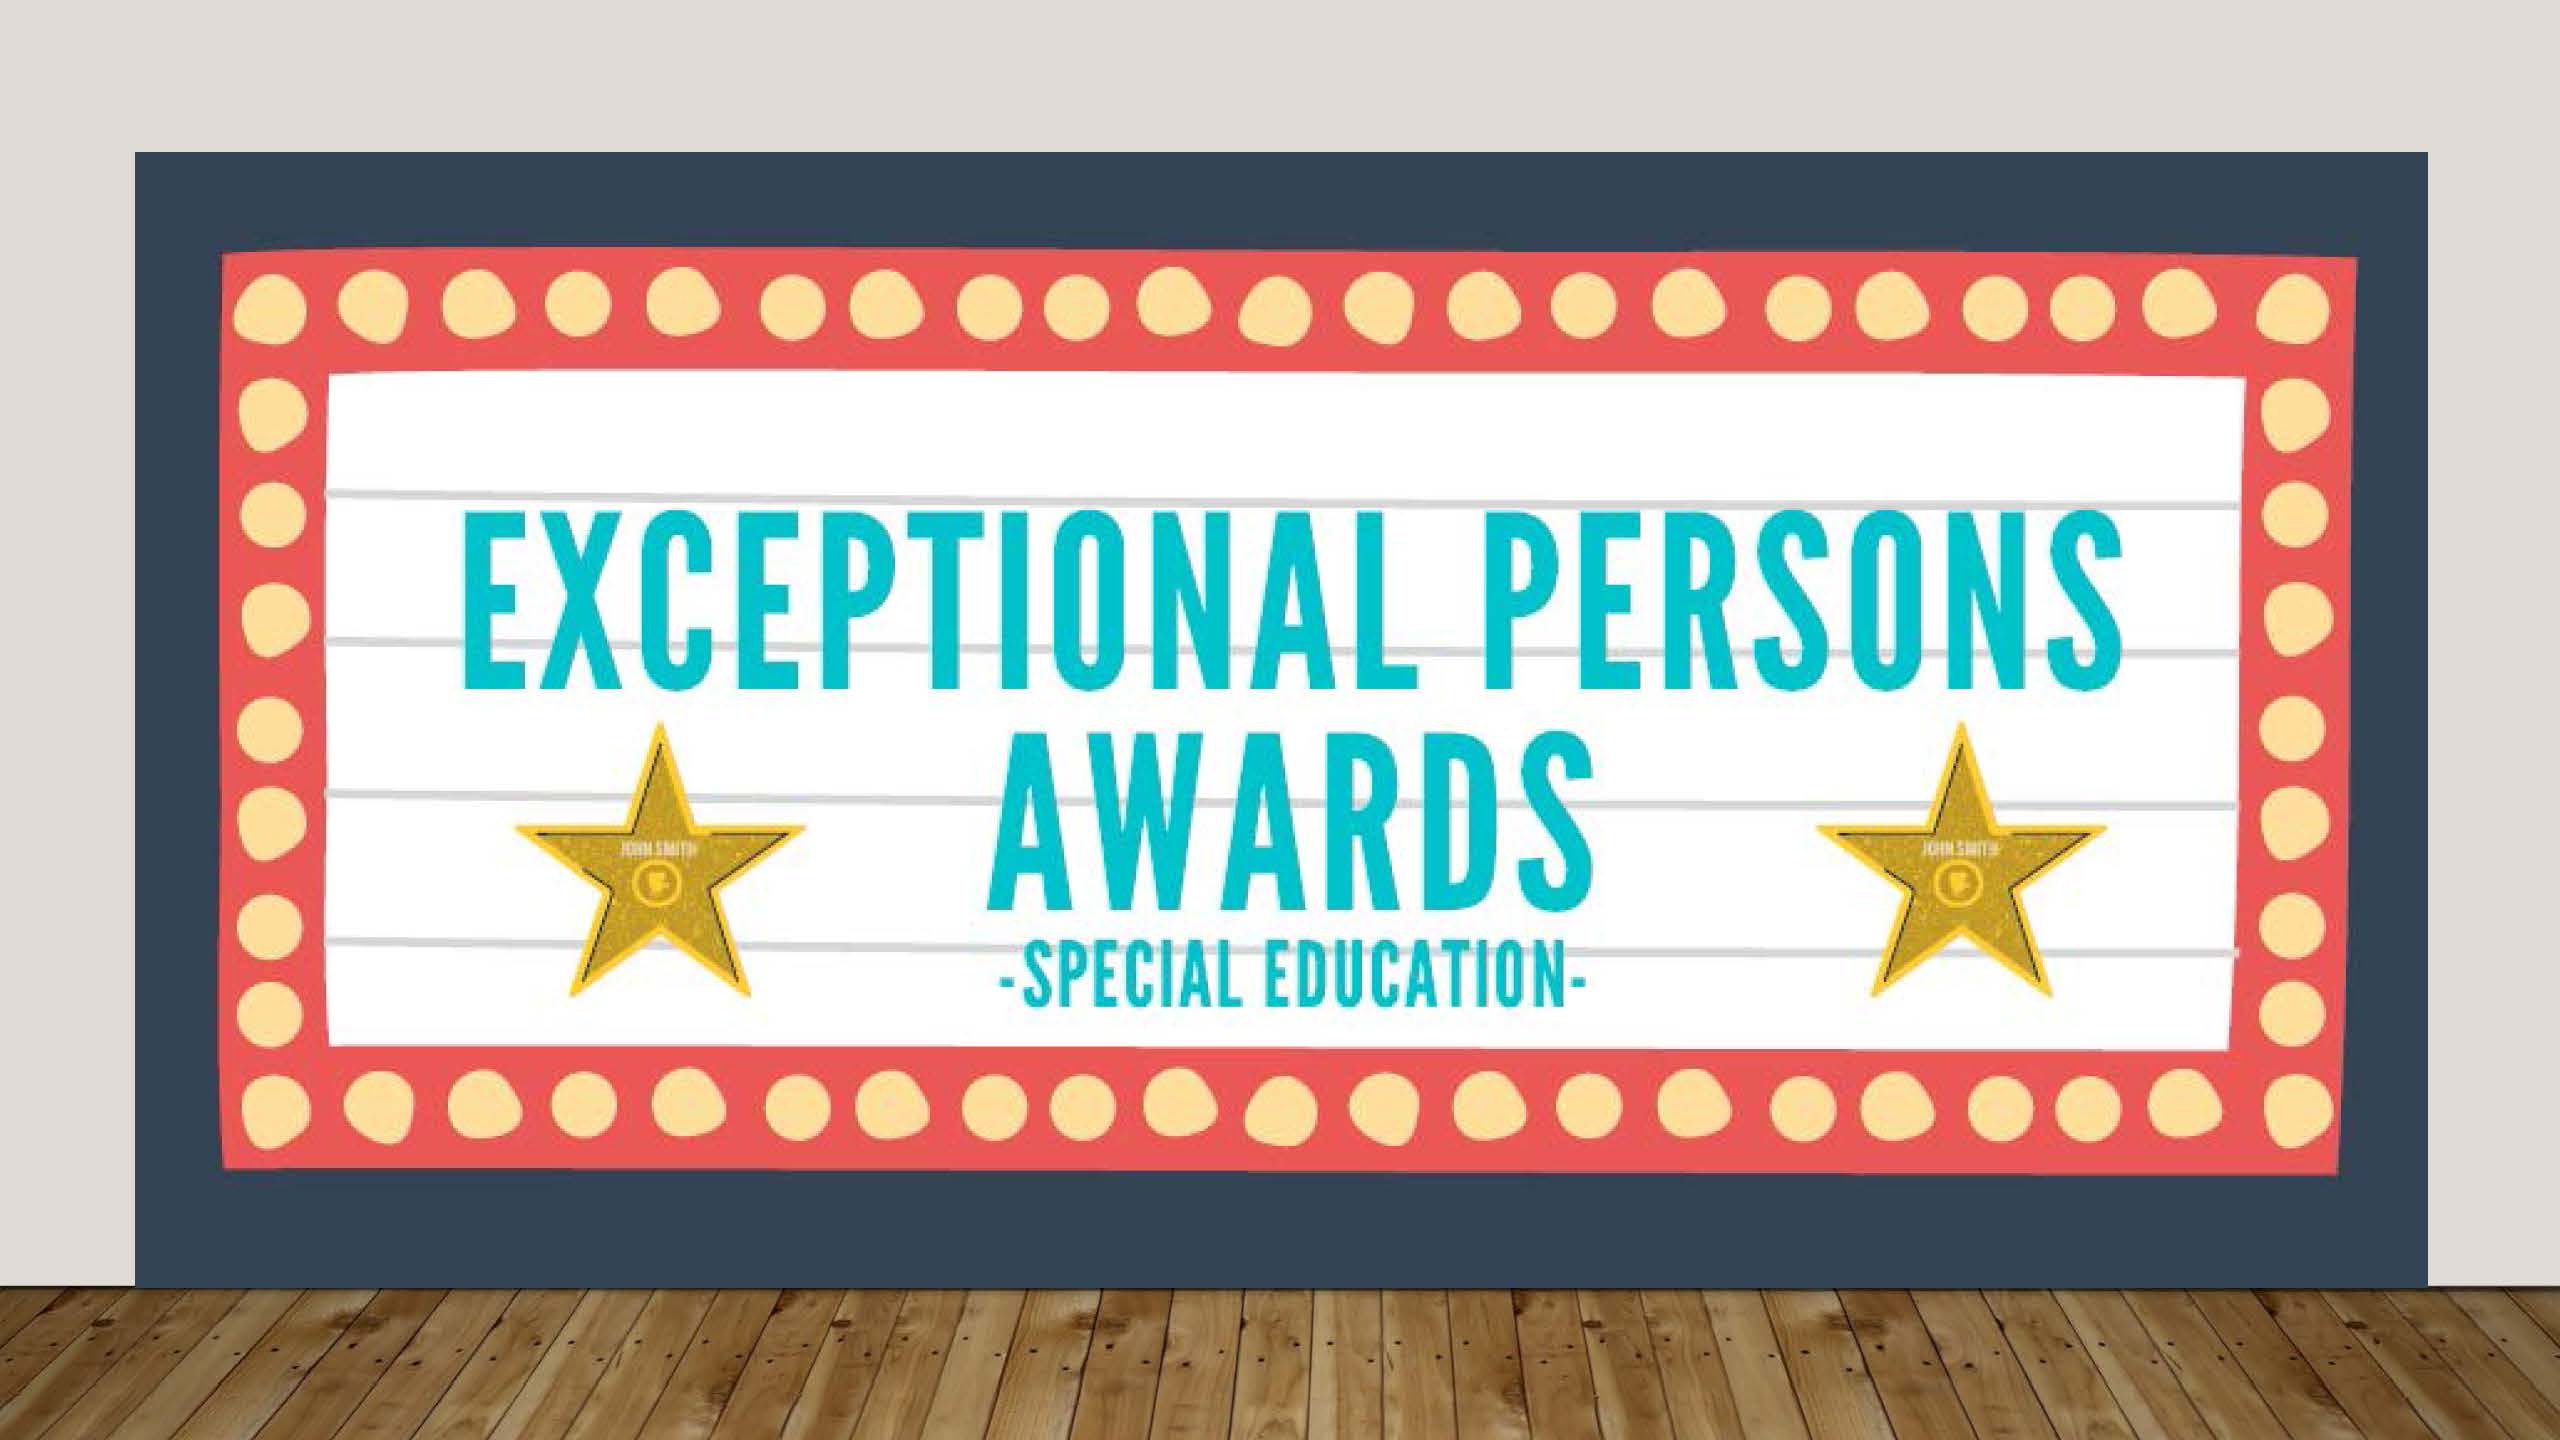 Red, black and yellow marque with 2 gold stars and blue lettering "Exceptional Persons Awards Special Education"